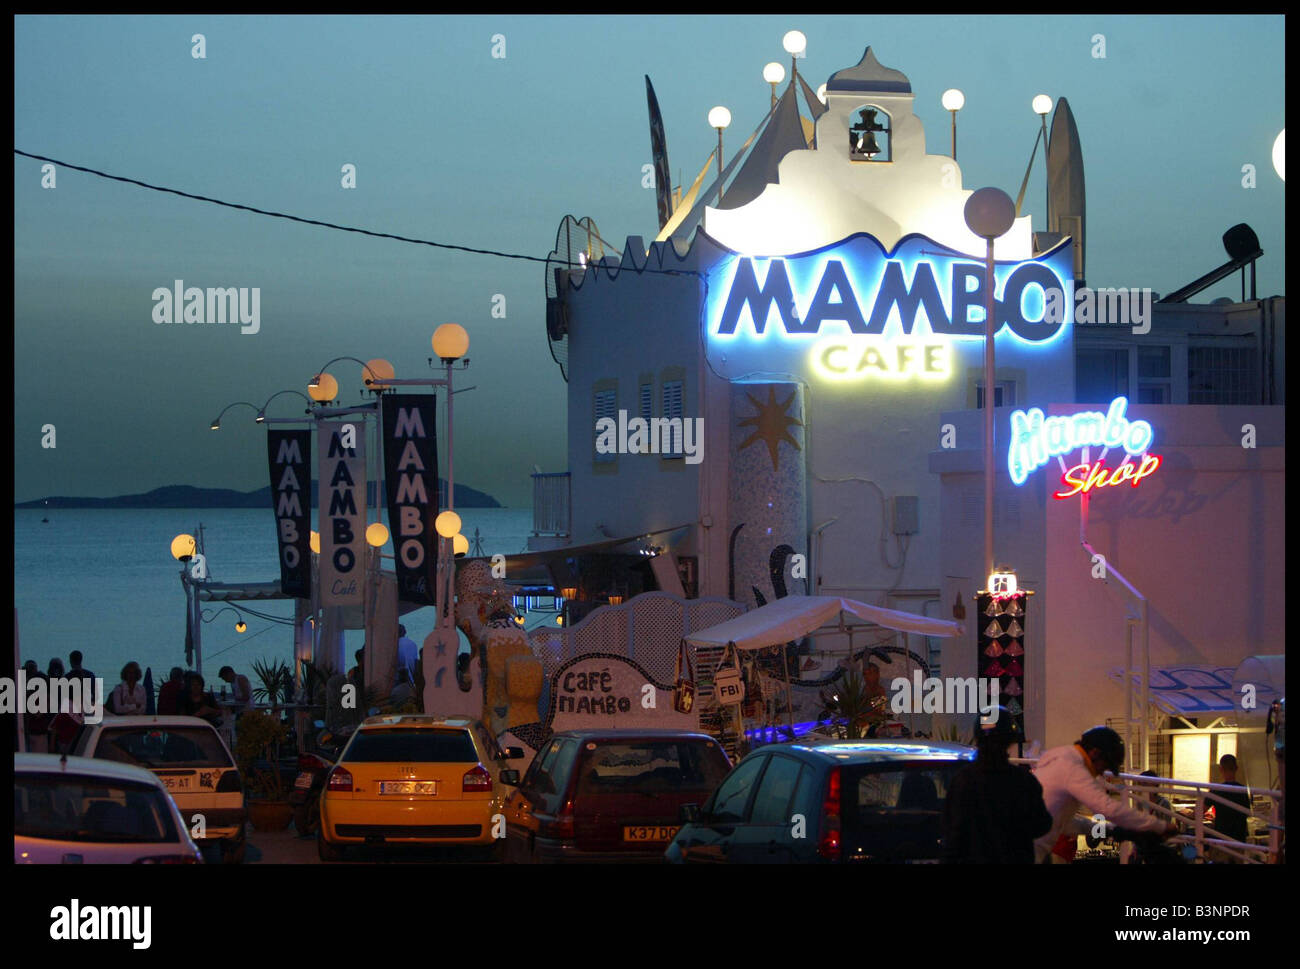 The Mambo Cafe Ibiza where Radio 1 Dj Pete Tong will be playing all summer  in Ibiza June 2004 Stock Photo - Alamy